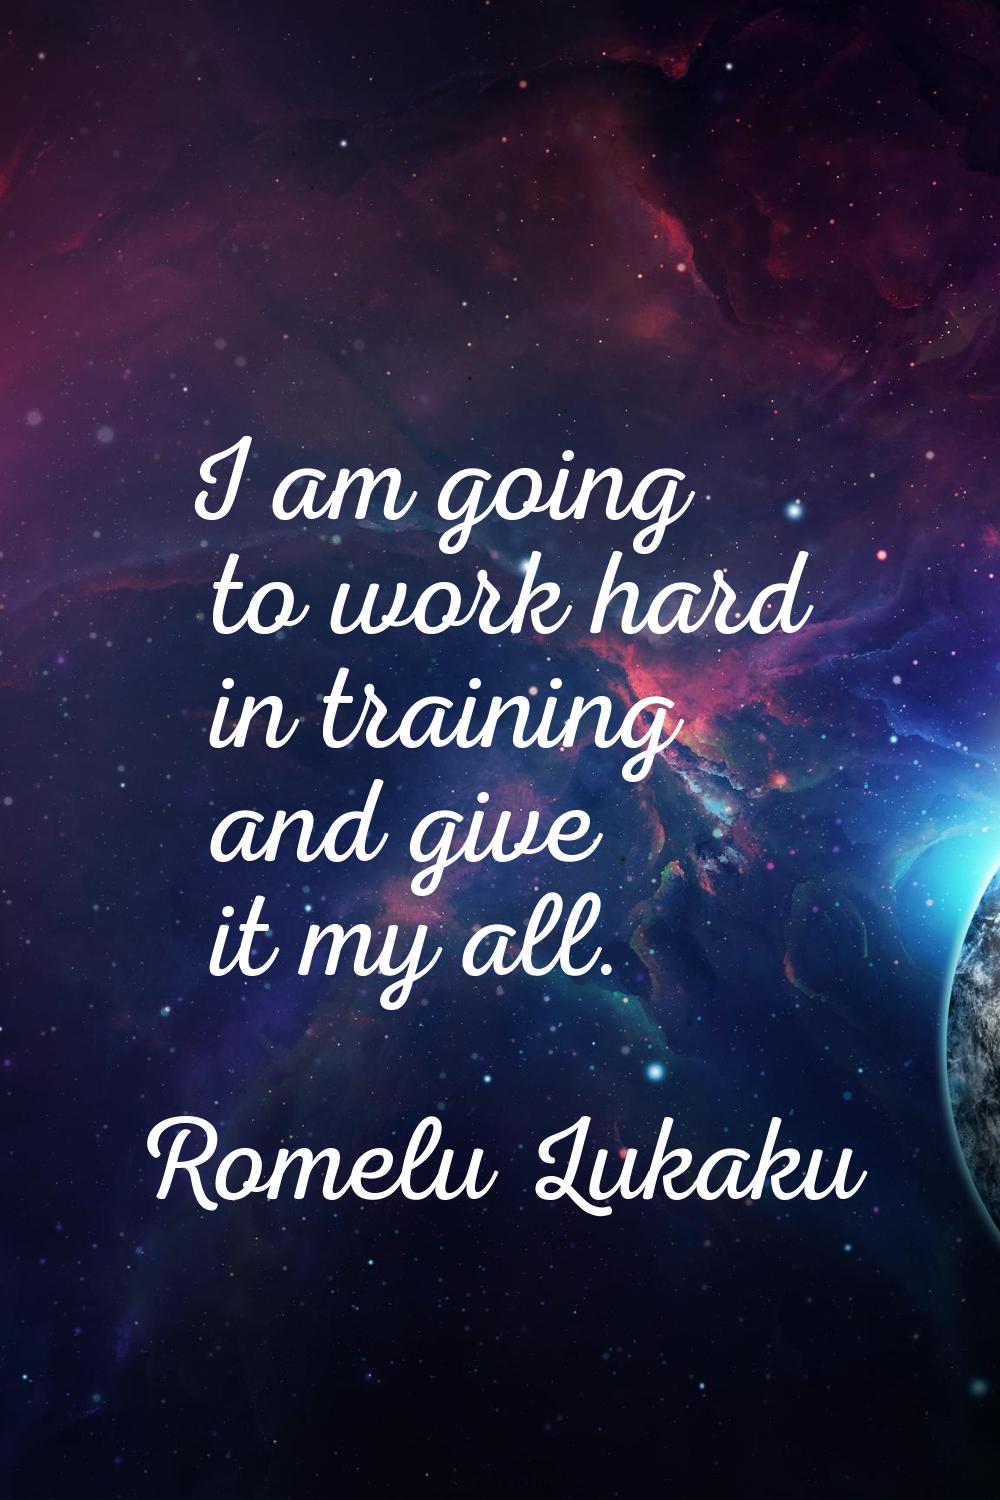 I am going to work hard in training and give it my all.